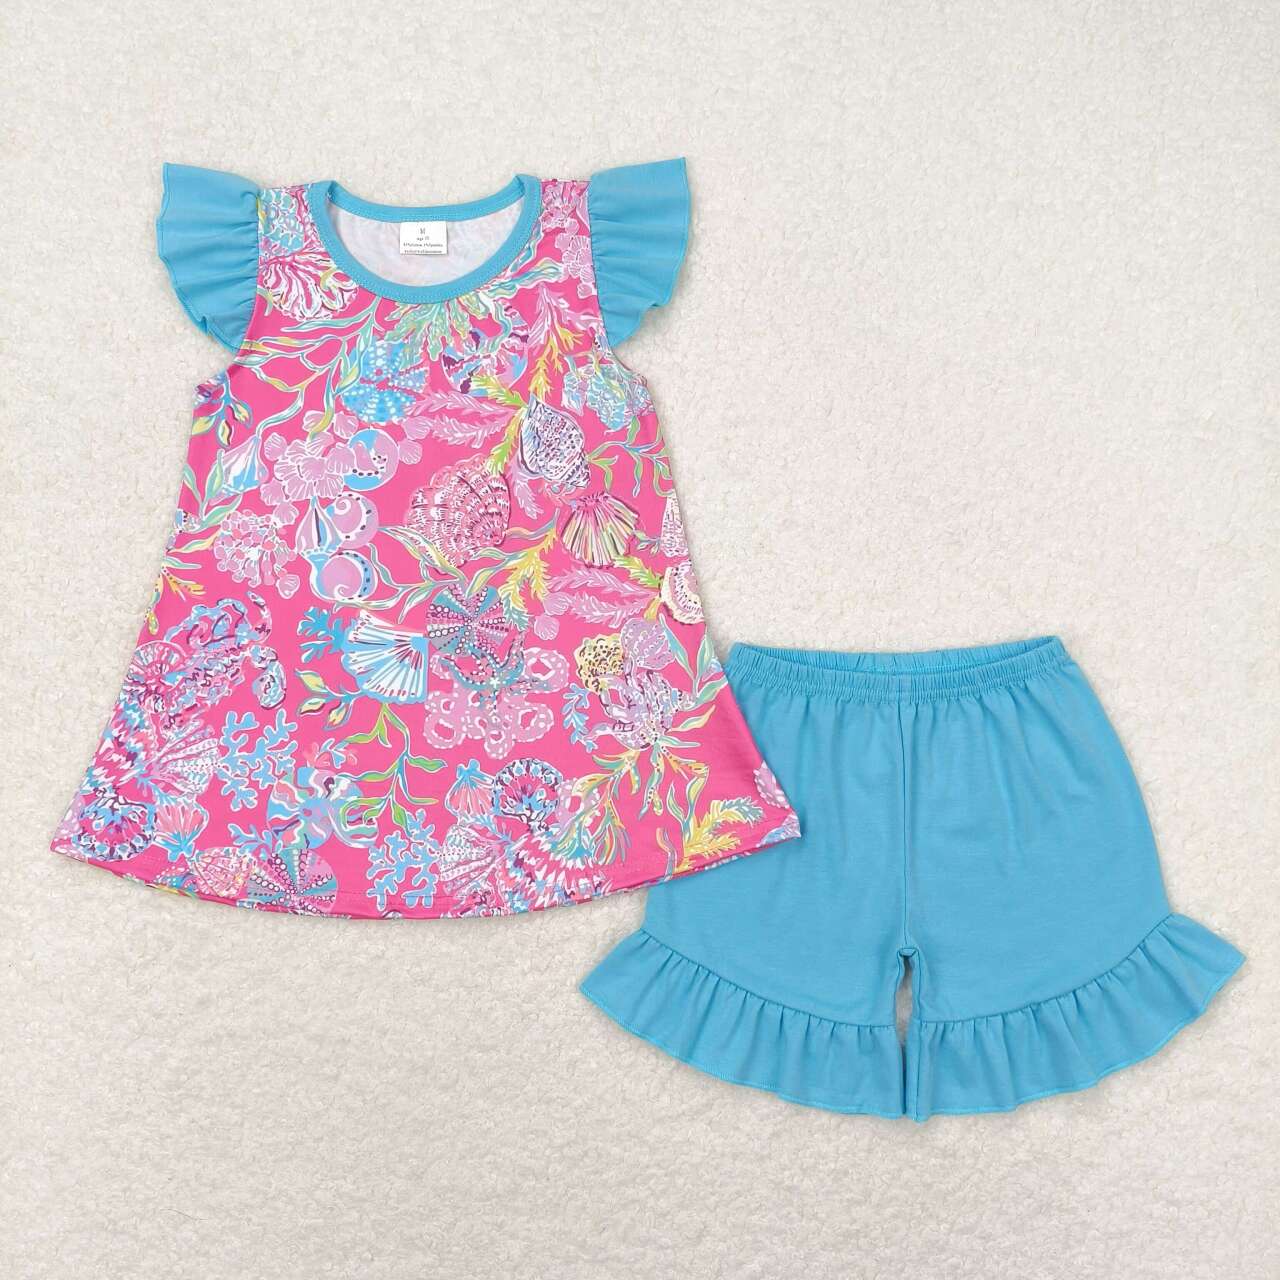 sister brother blue floral wholesale matching sibling set